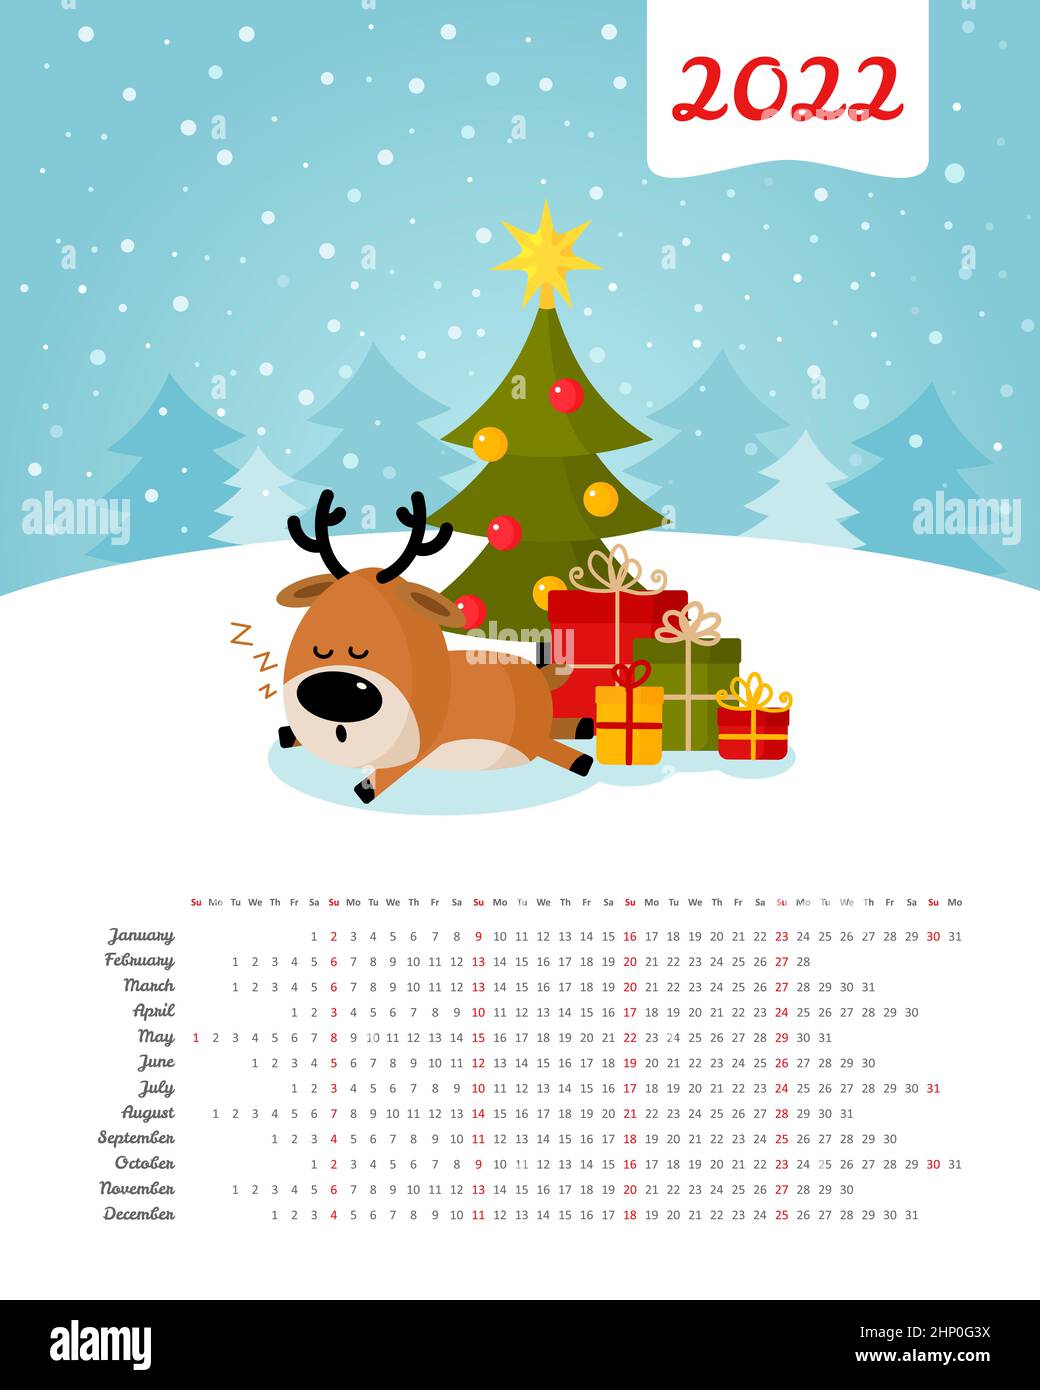 Calendar 2022 year. Santa deer sleeps under Christmas tree with gifts. Merry Christmas and Happy New Year. Color vector template. Week starts on Sunda Stock Photo